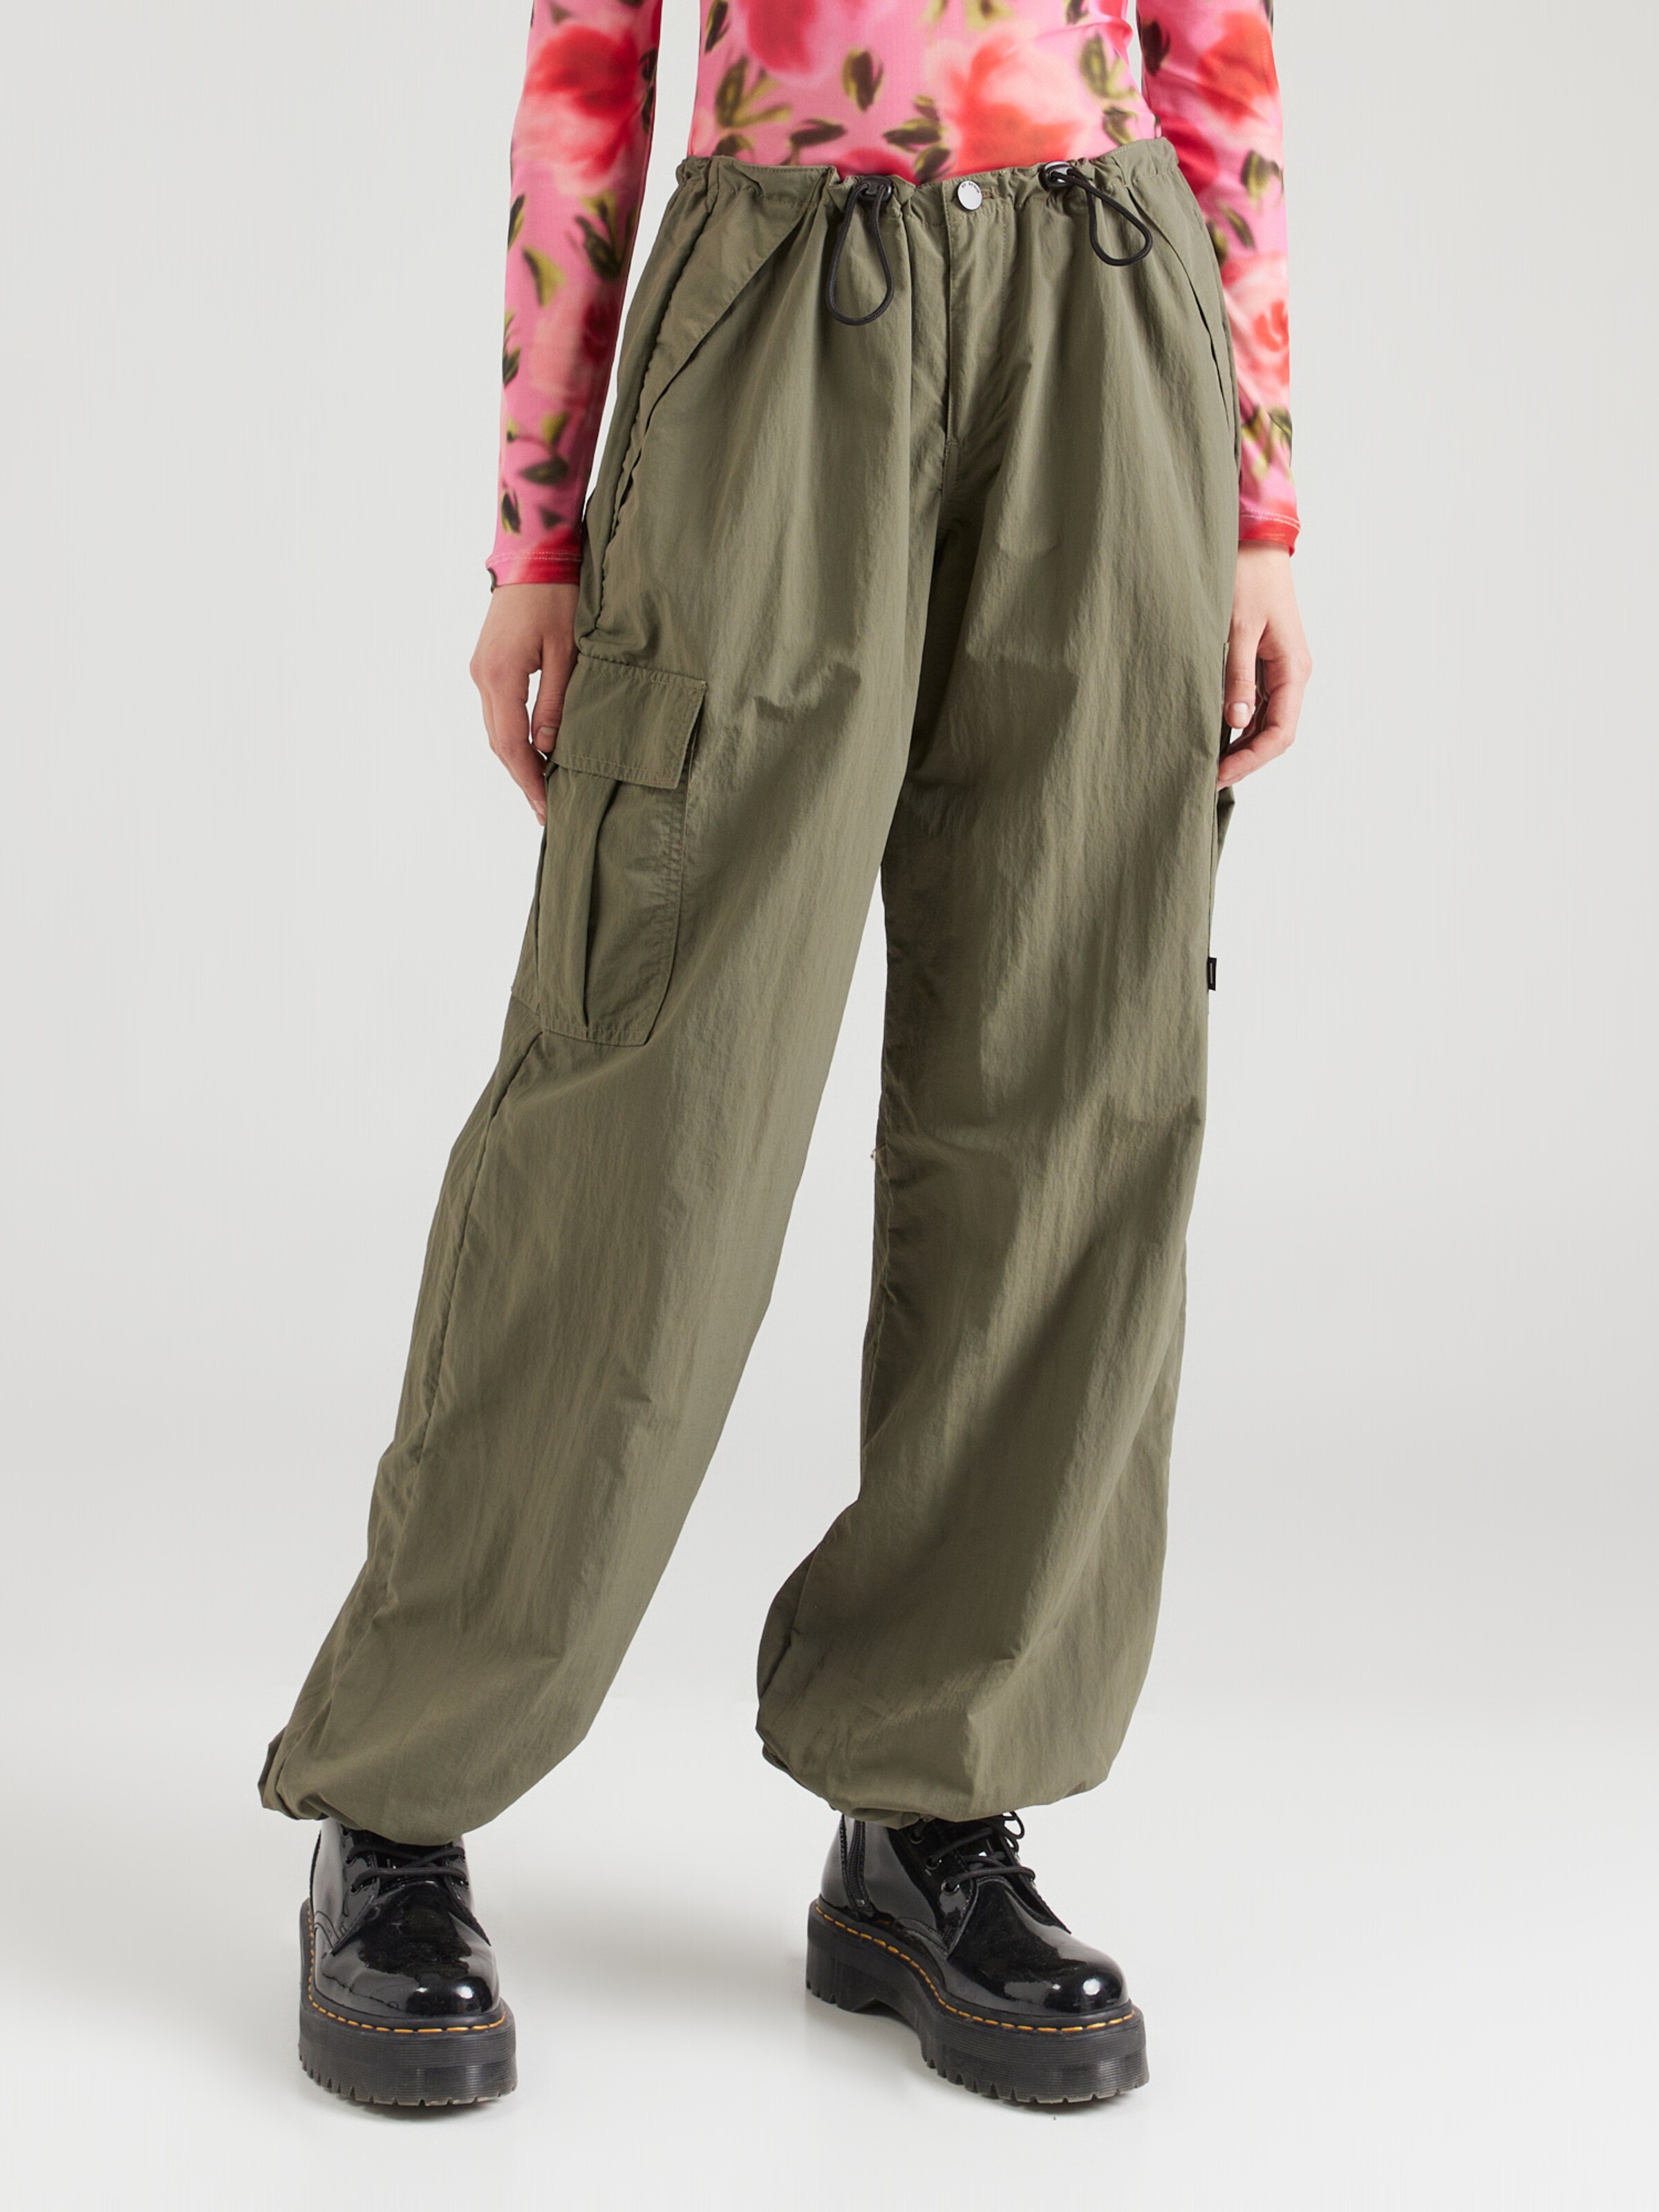 Buy Off Duty India Utility Relaxed Fit Cargo Pants-black online